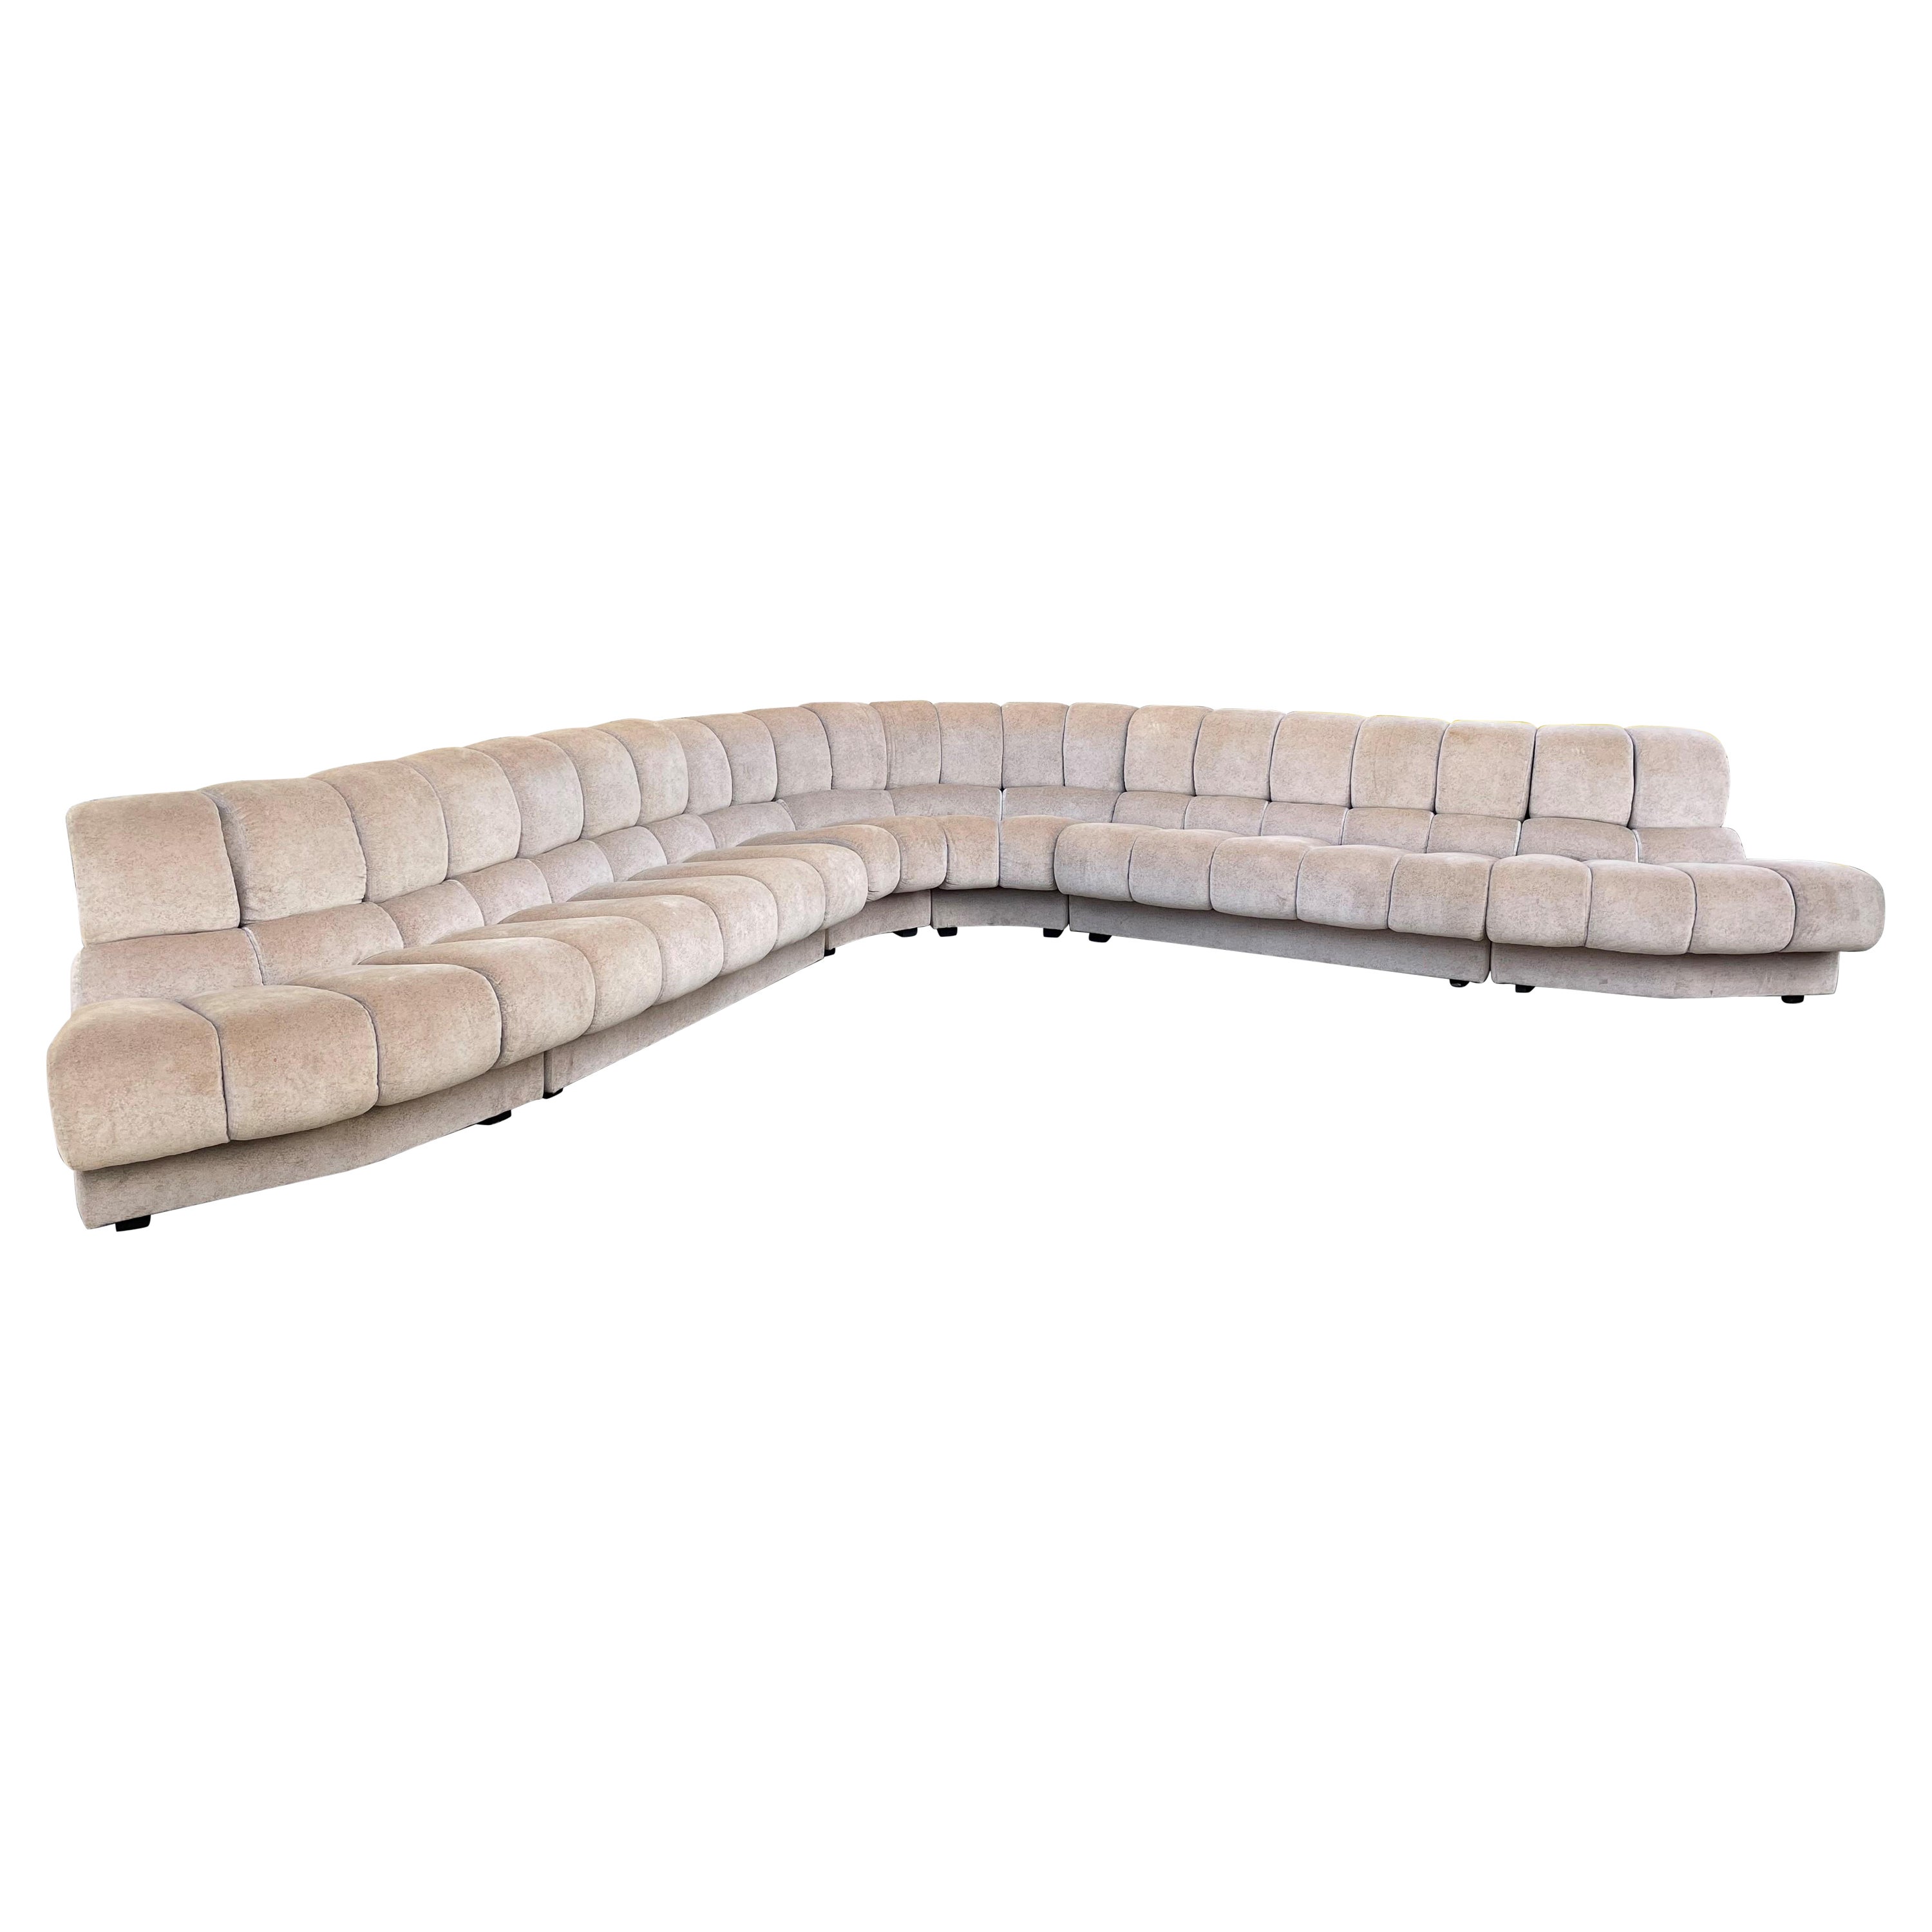 1960s 6 Piece Sectional Sofa